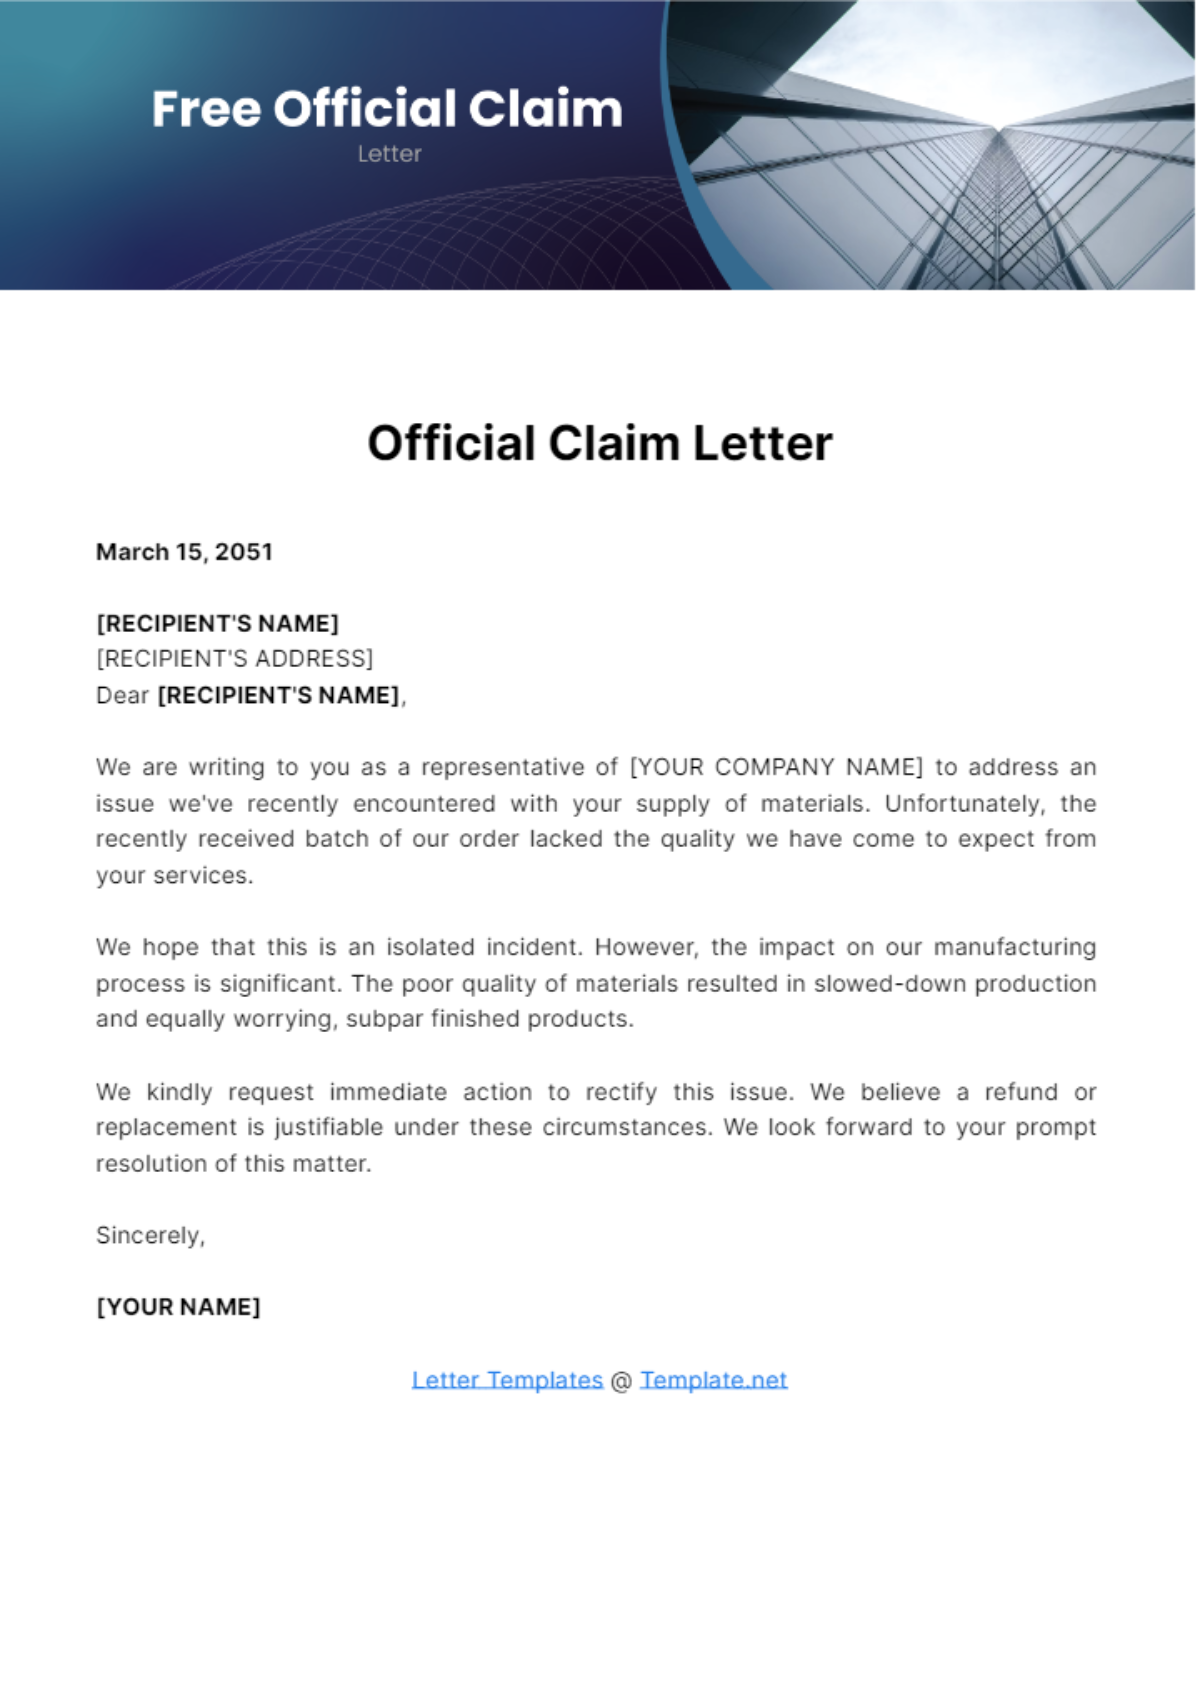 Free Official Claim Letter Template